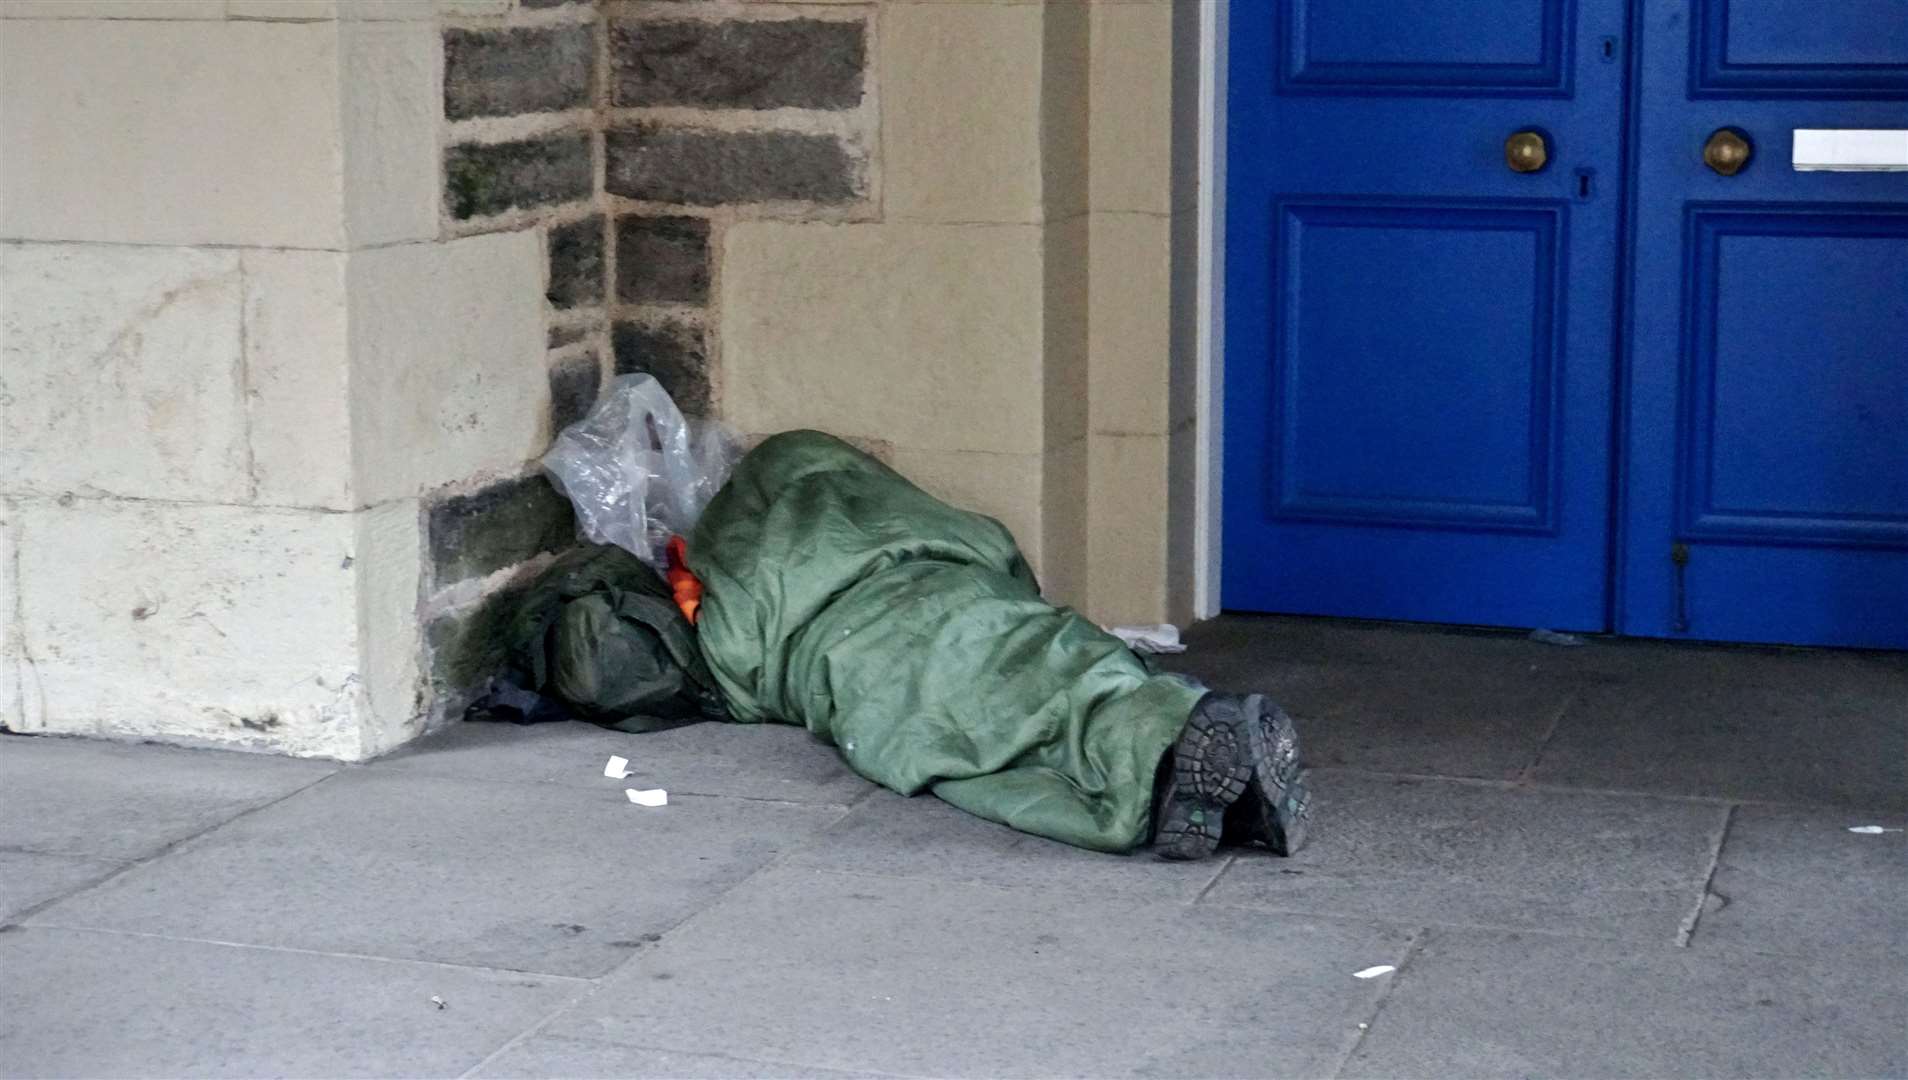 Platform for Change sets out priorities to tackle homelessness in Scotland during 2022. Picture: DGS